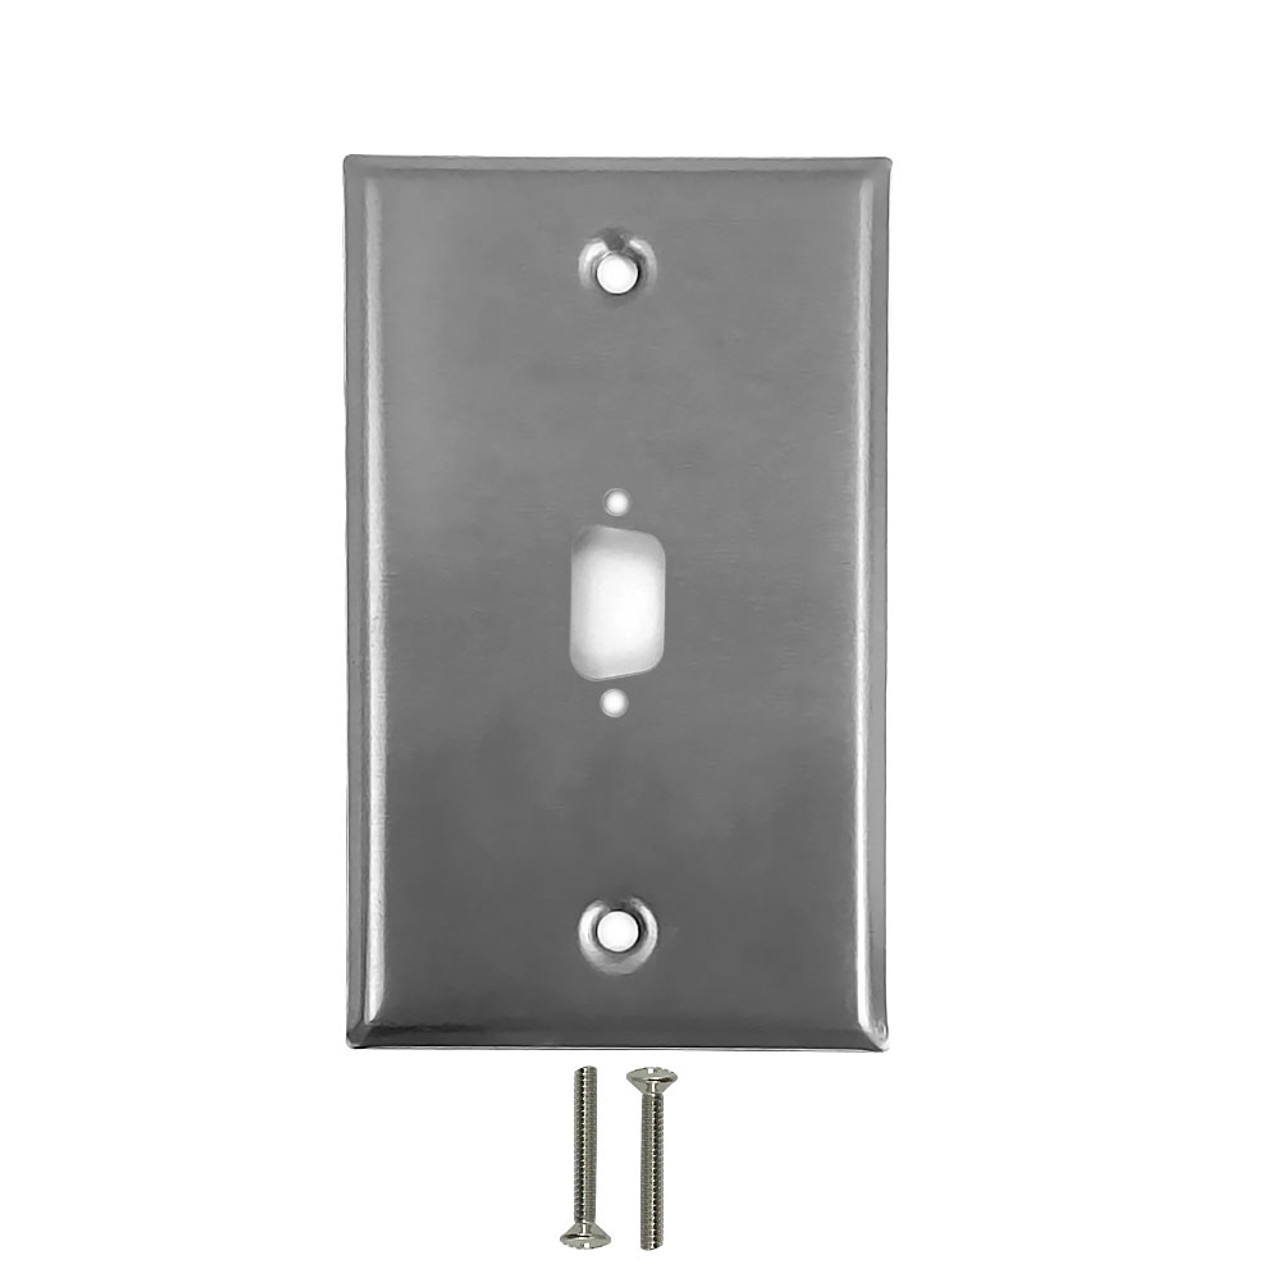 Wall Plate Single Gang 1x Vertical DB9 Hole Stainless Steel